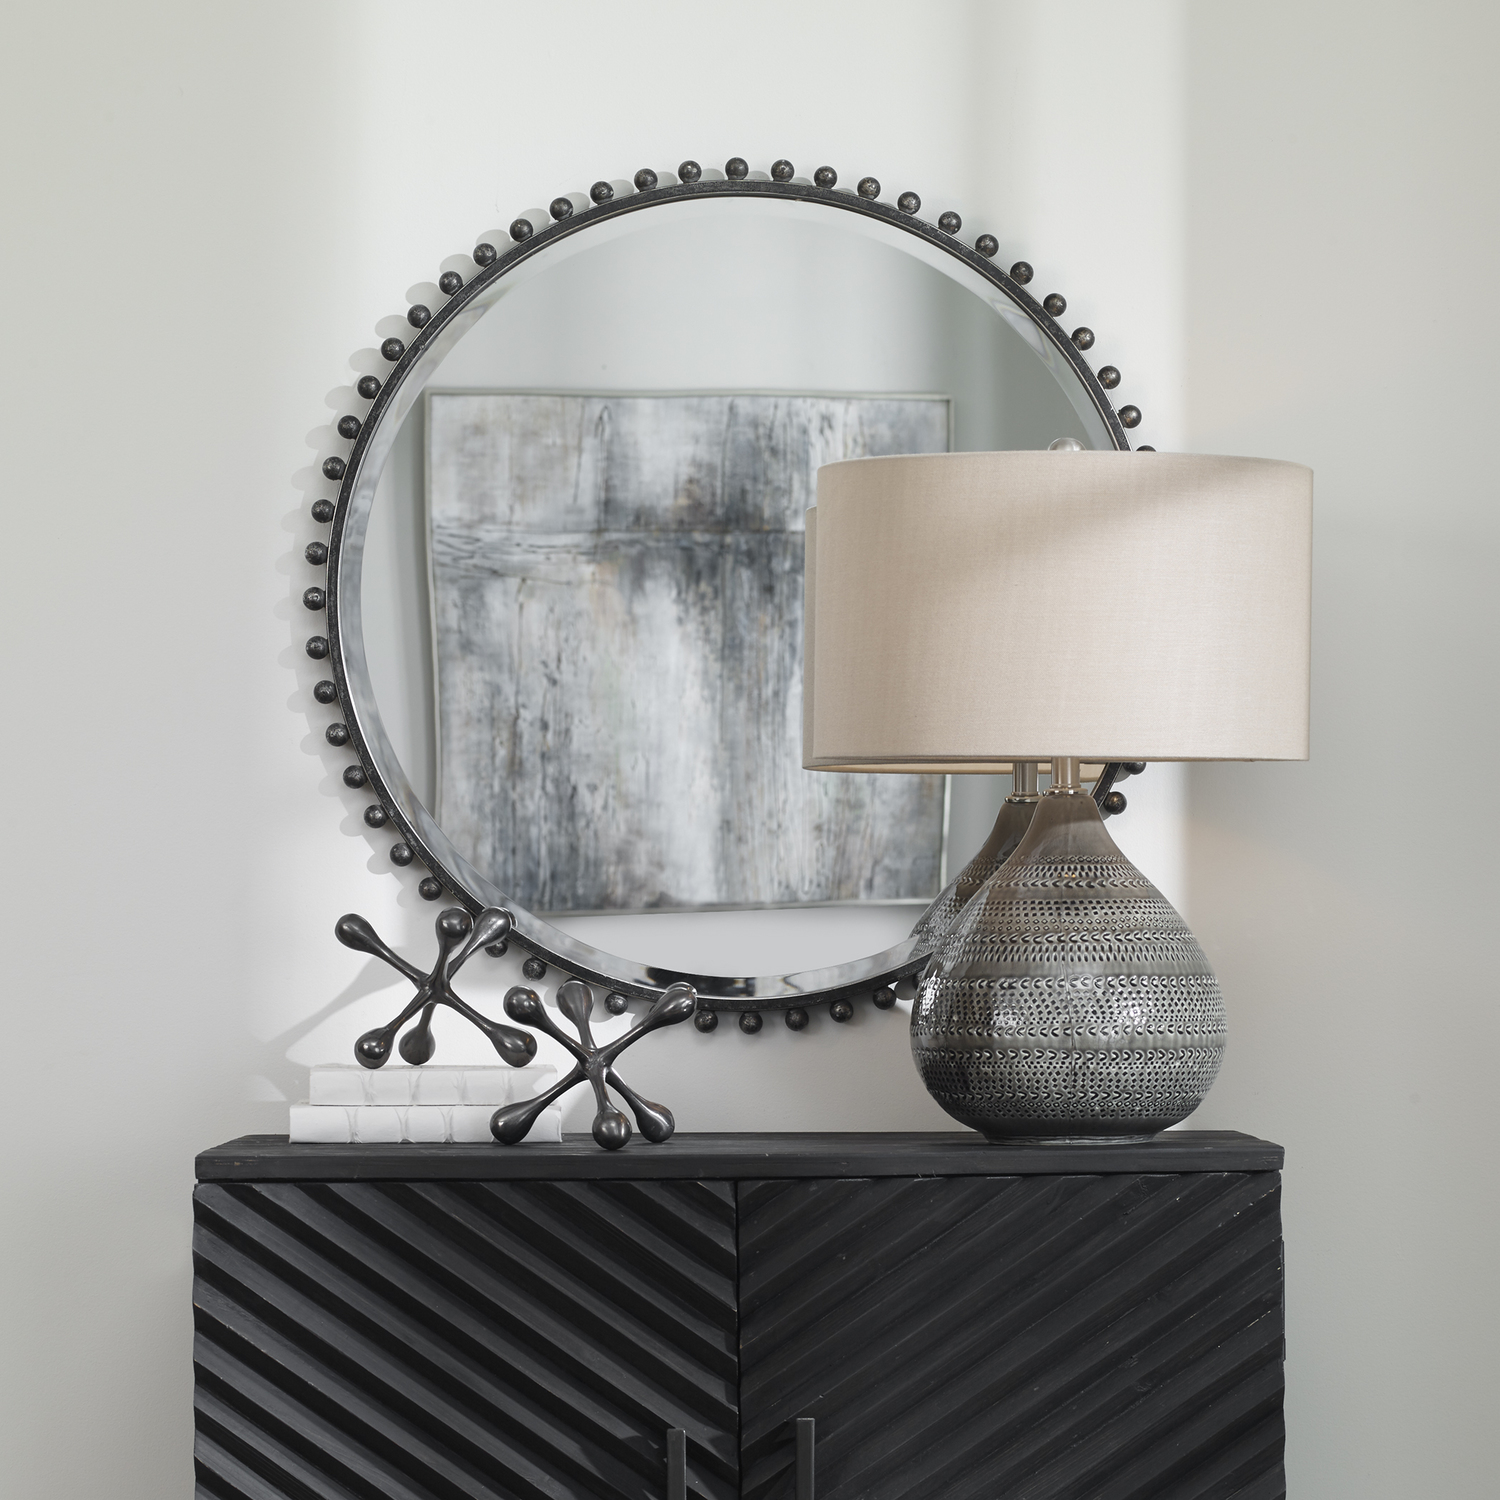 design mirror in living room Uttermost Round Iron Mirror Petite Iron Spheres Line The Outer Edge Of This Round Frame, Finished In A Distressed Black With Silver Highlights And A Light Gray Glaze. Mirror Features A Generous 1 1/4" Bevel.